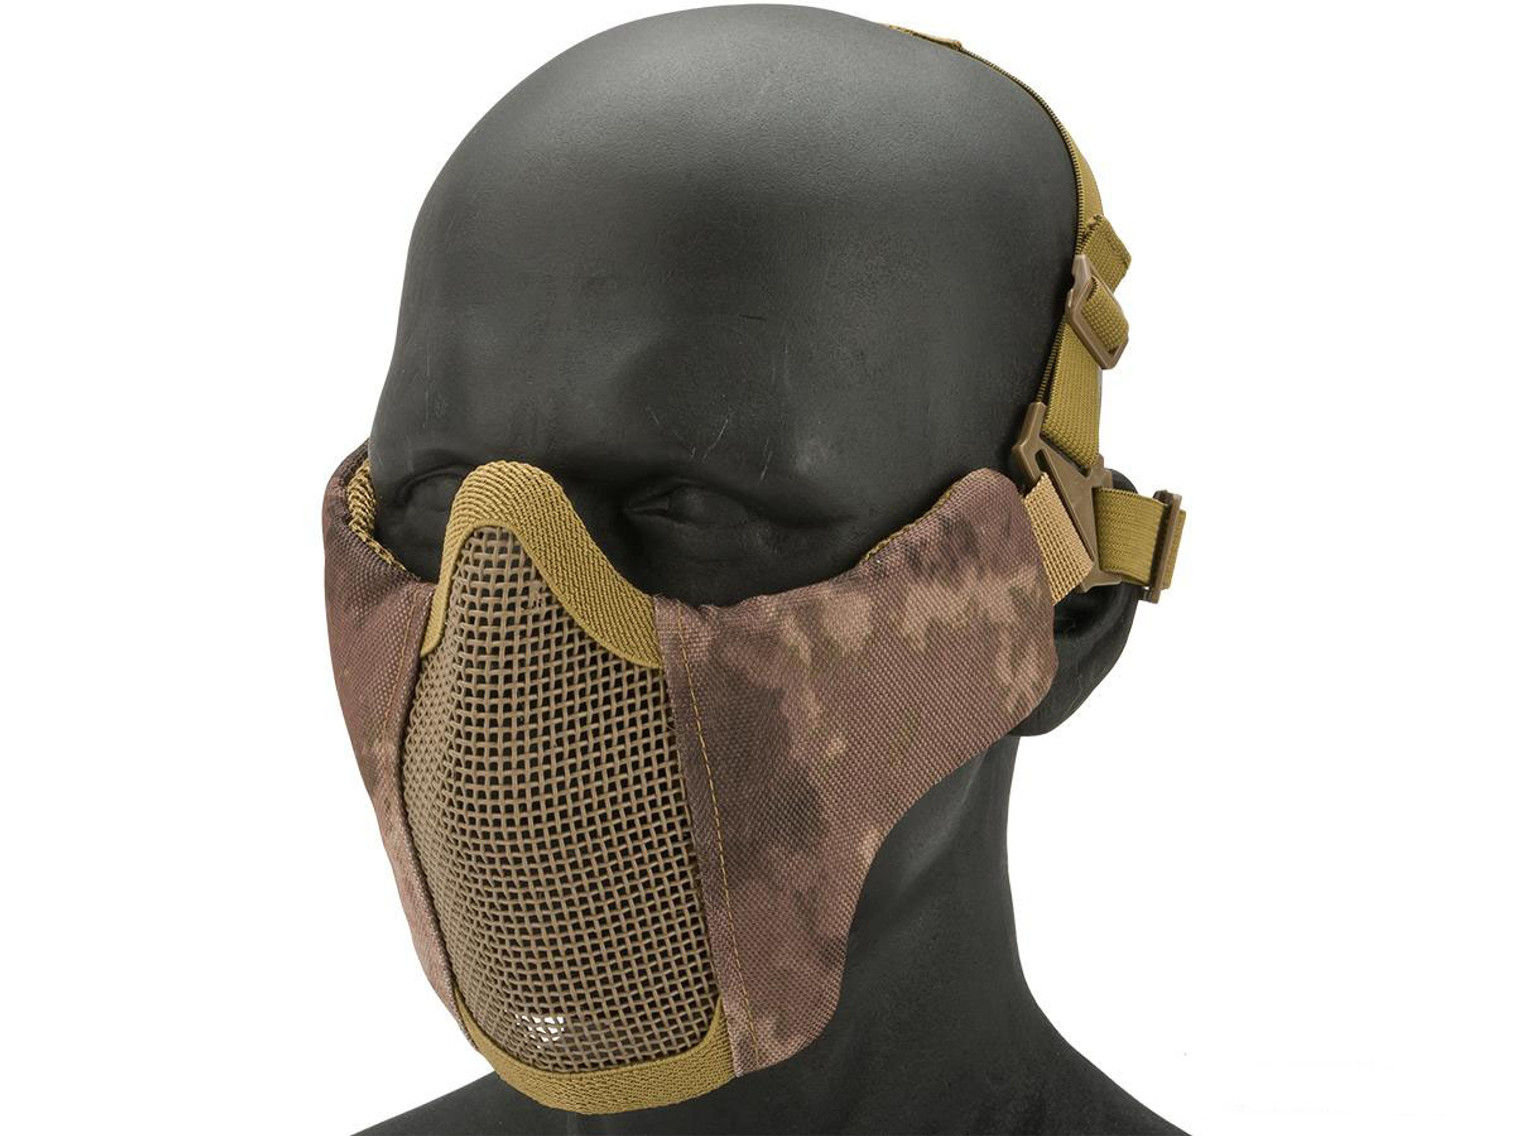 Matrix Low Profile Iron Face Padded Lower Half Face Mask (Color: Arid)